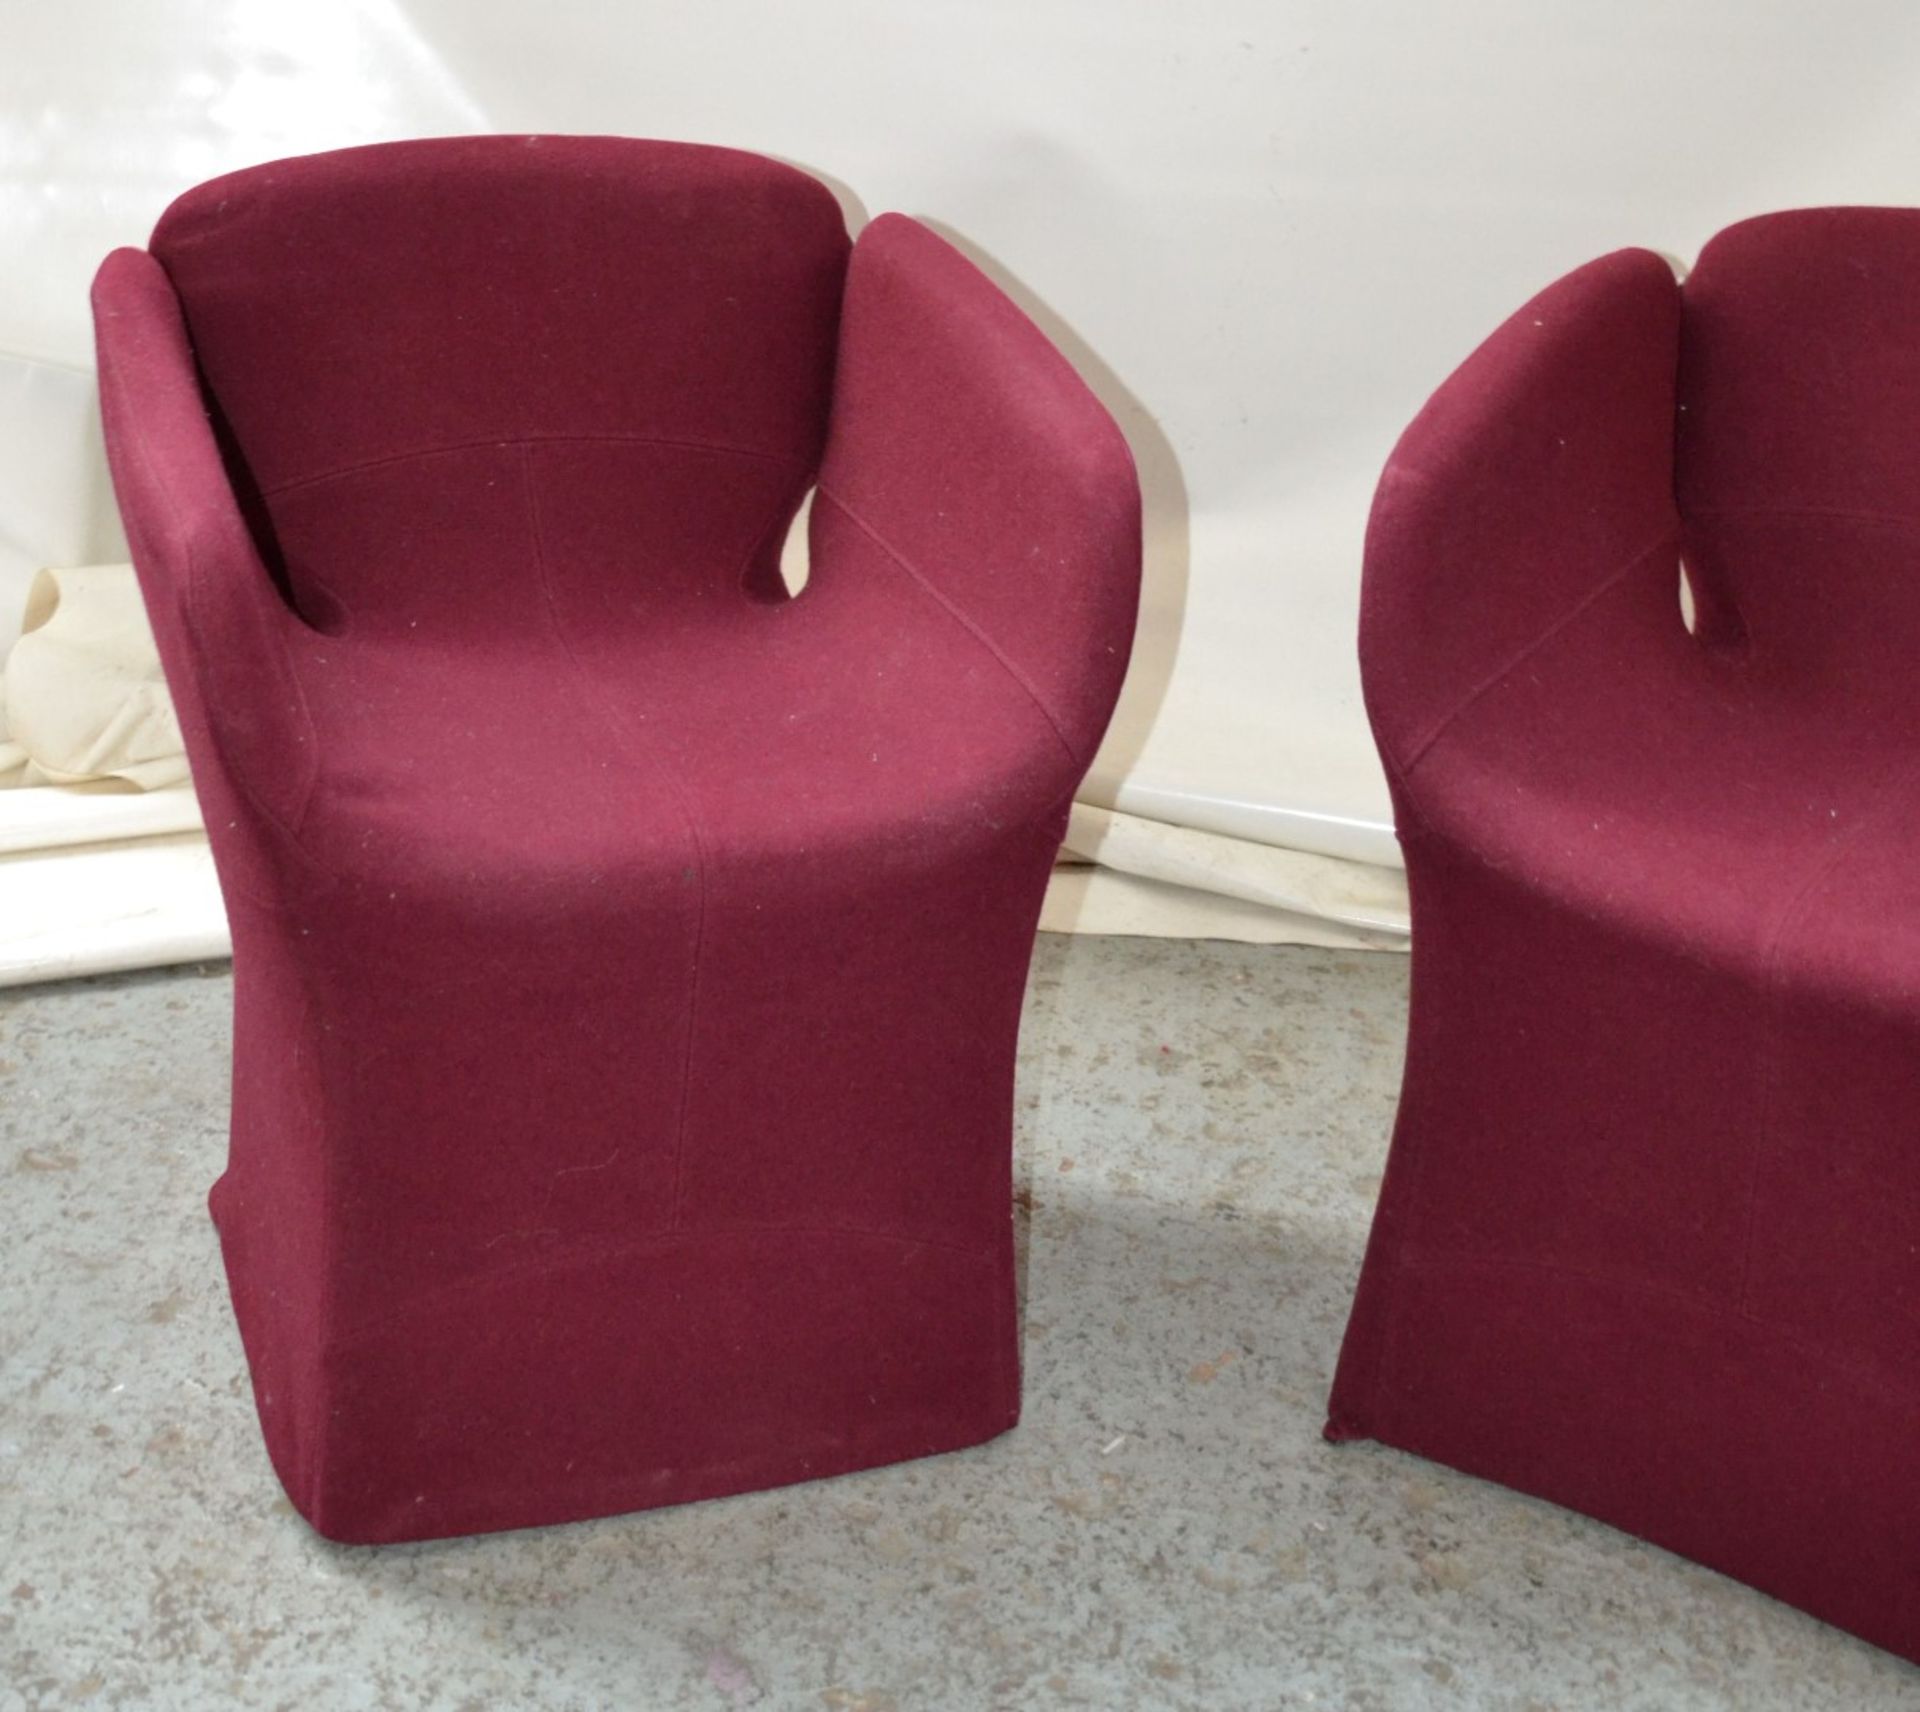 2 x Moroso Bloomy Small Armchairs Designed By Patricia Urquiola - CL314 - Location: Altrincham WA14 - Image 3 of 7